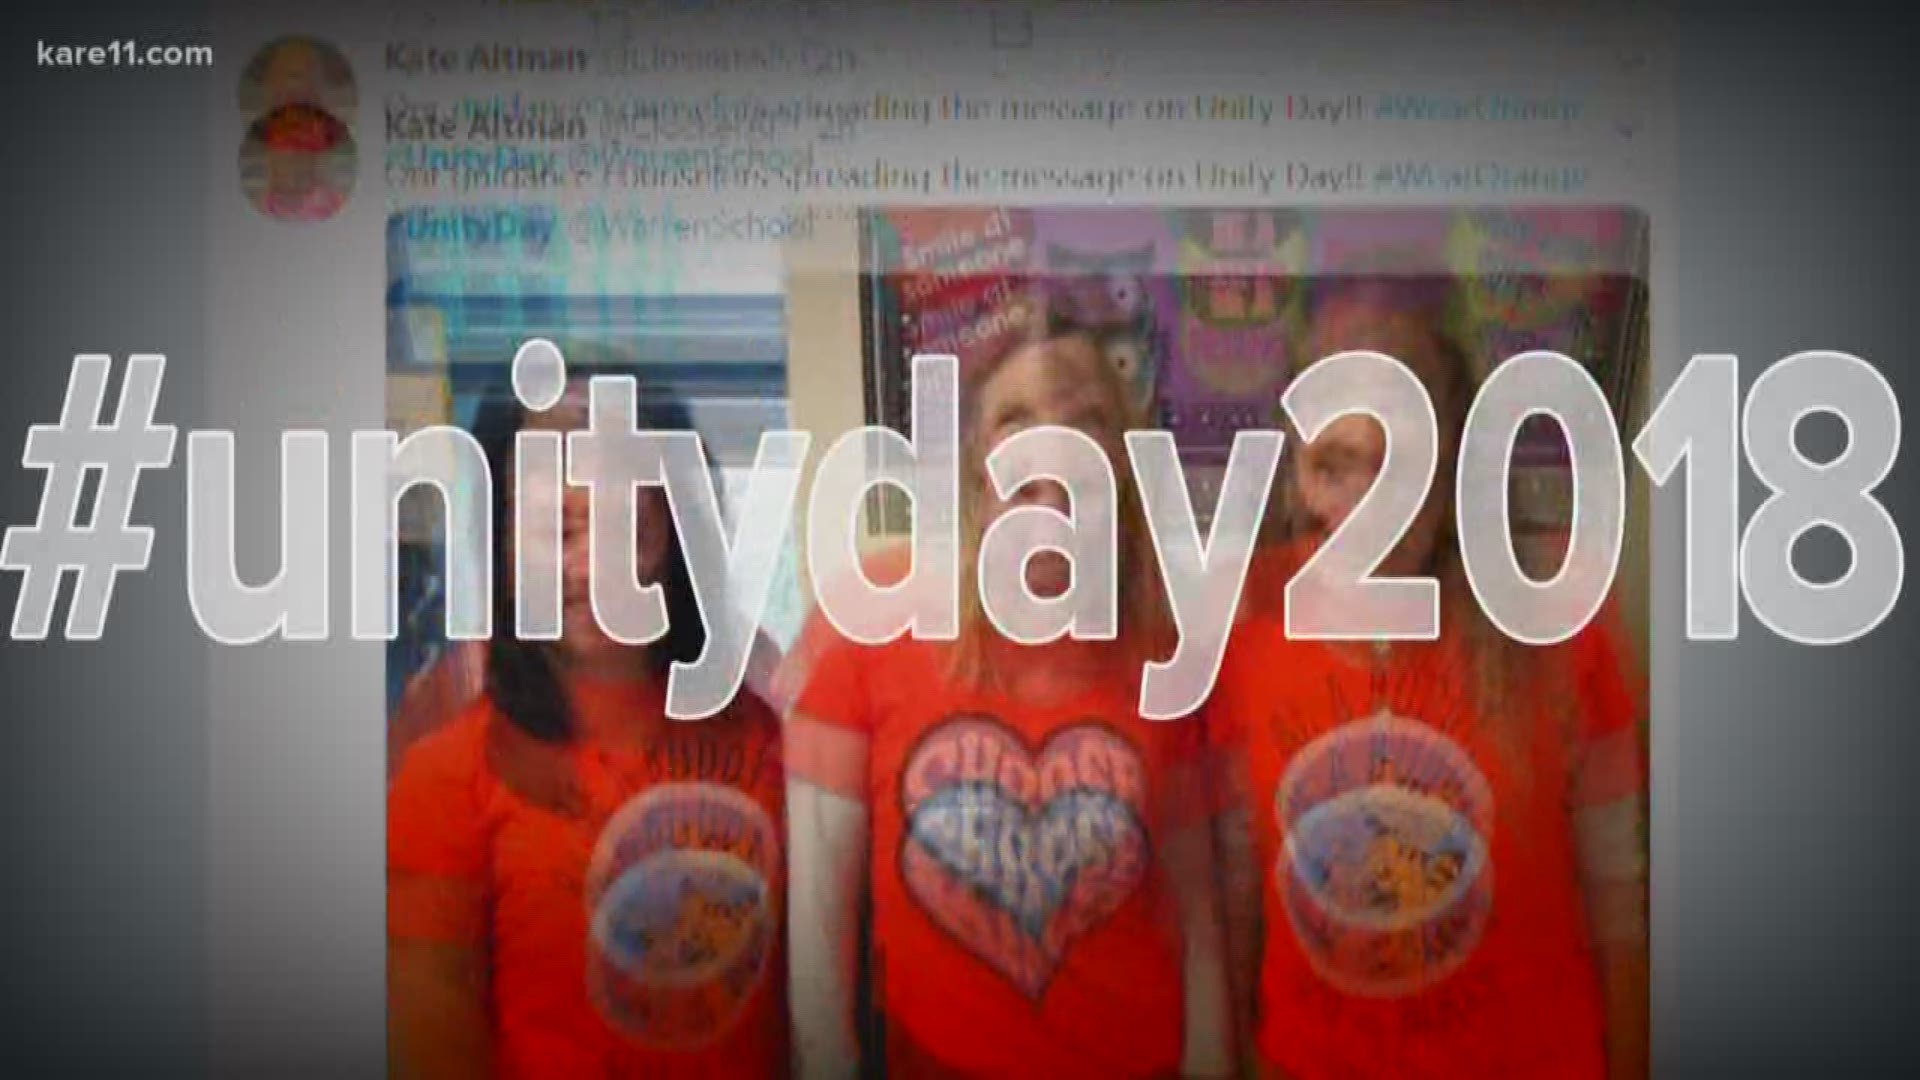 The latest observance of Unity Day spread both orange and kindness throughout the state, country and world. The Minnesota-based PACER organization launched the day in 2011 as part of their anti-bullying month. https://kare11.tv/2Rb7q2l